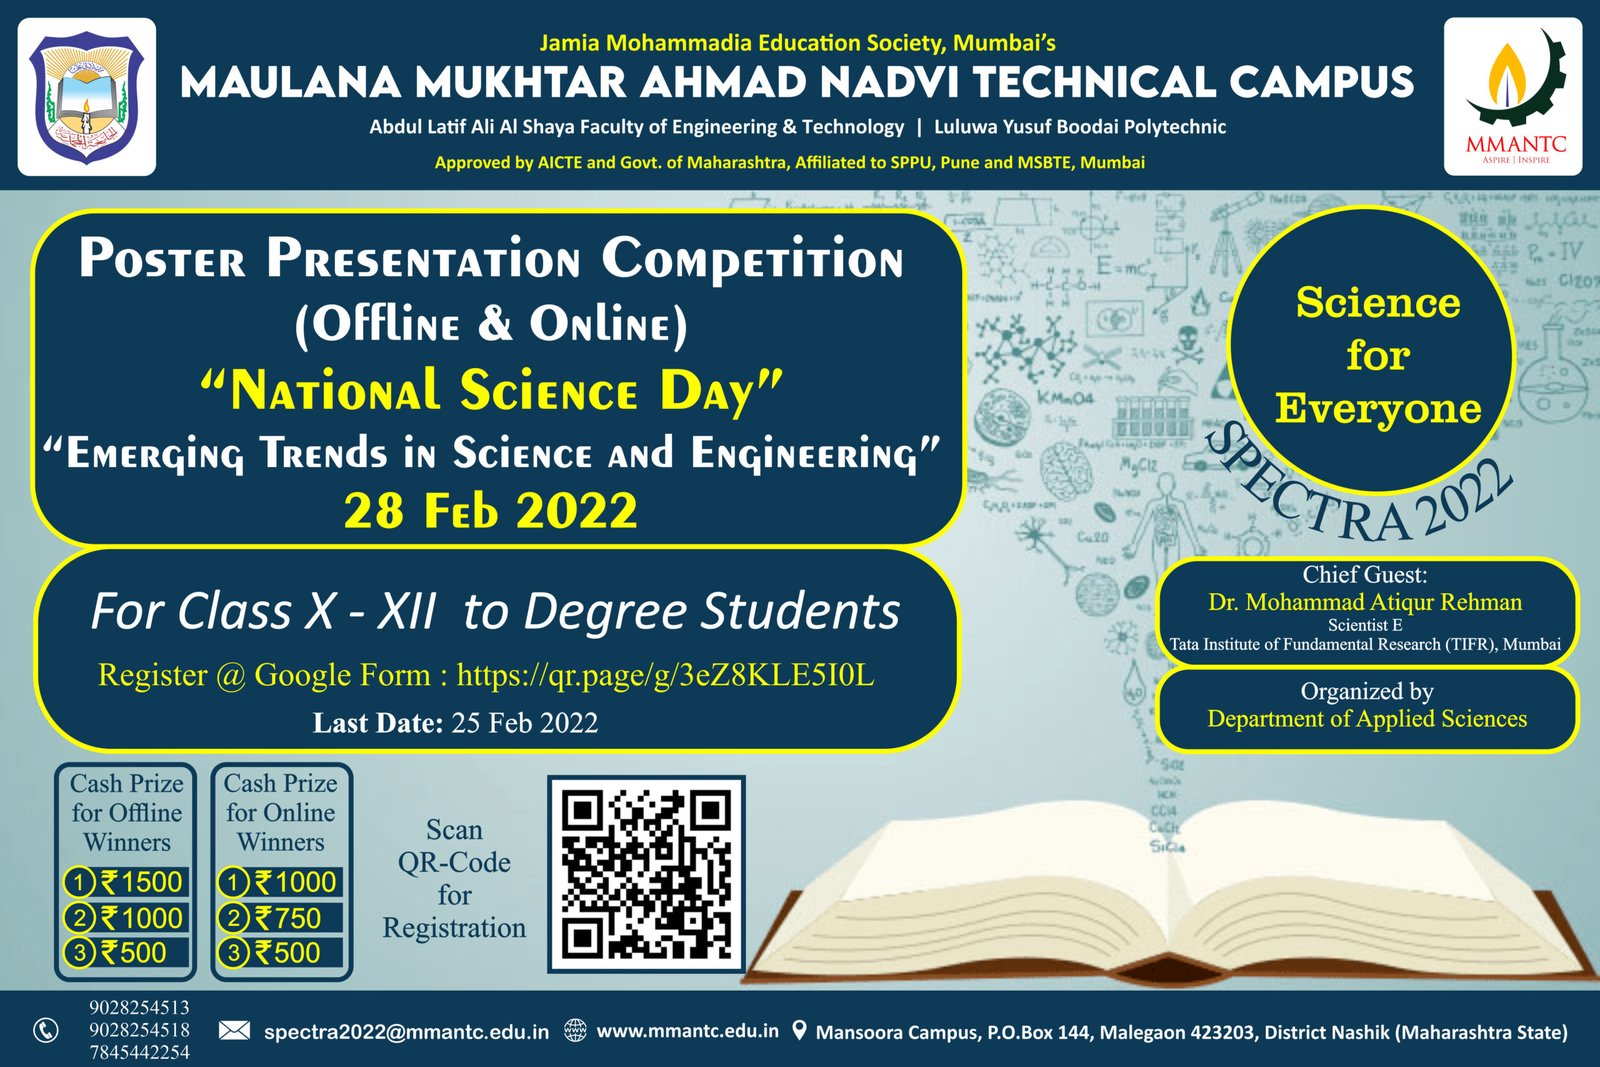 sci day 28 feb 2022